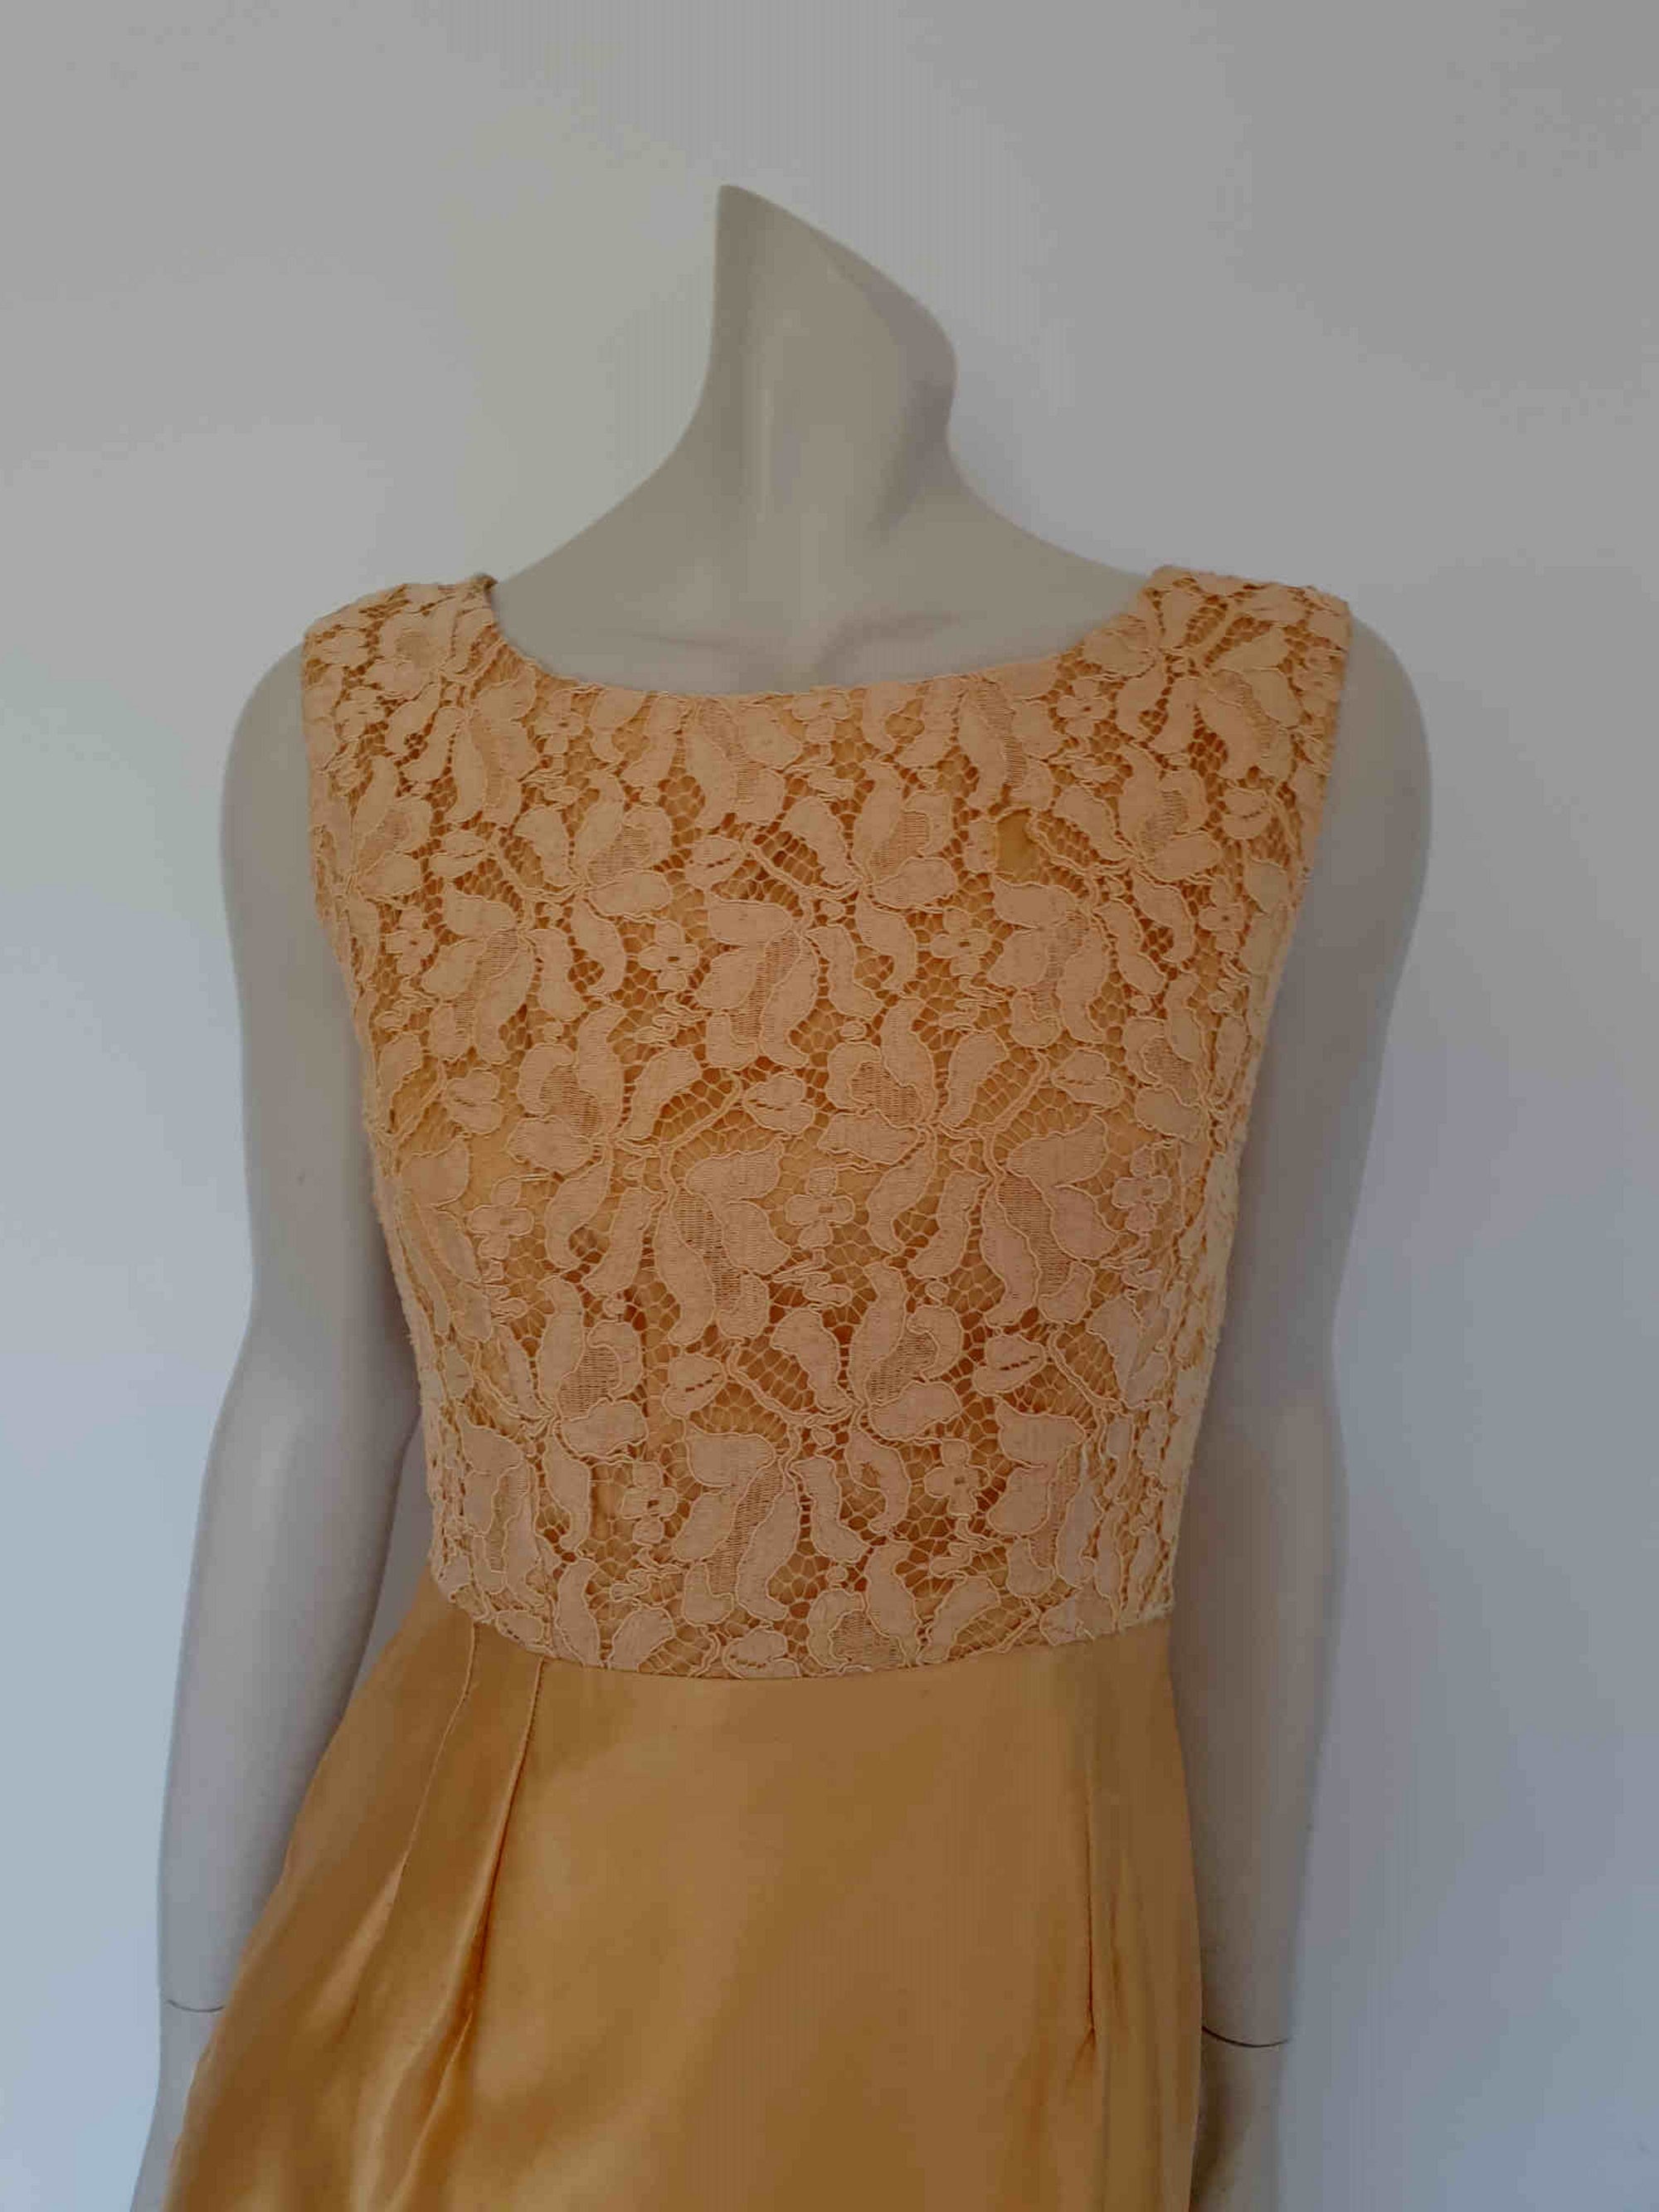 1960s gold satin and lace cocktail dress